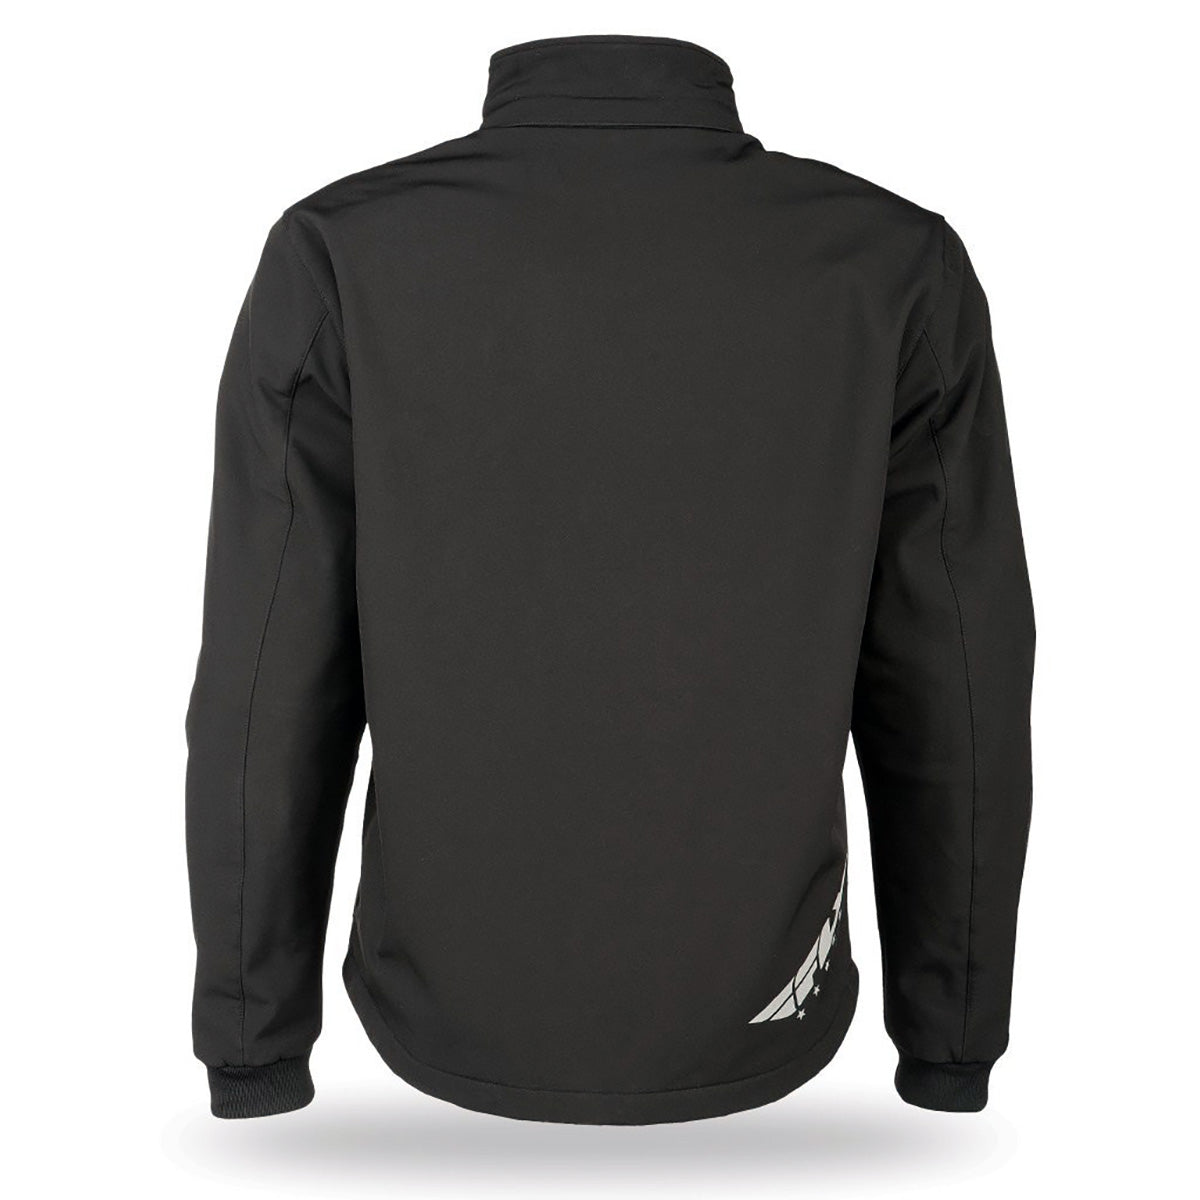 ARMORED TECH HOODIE BLACK MD